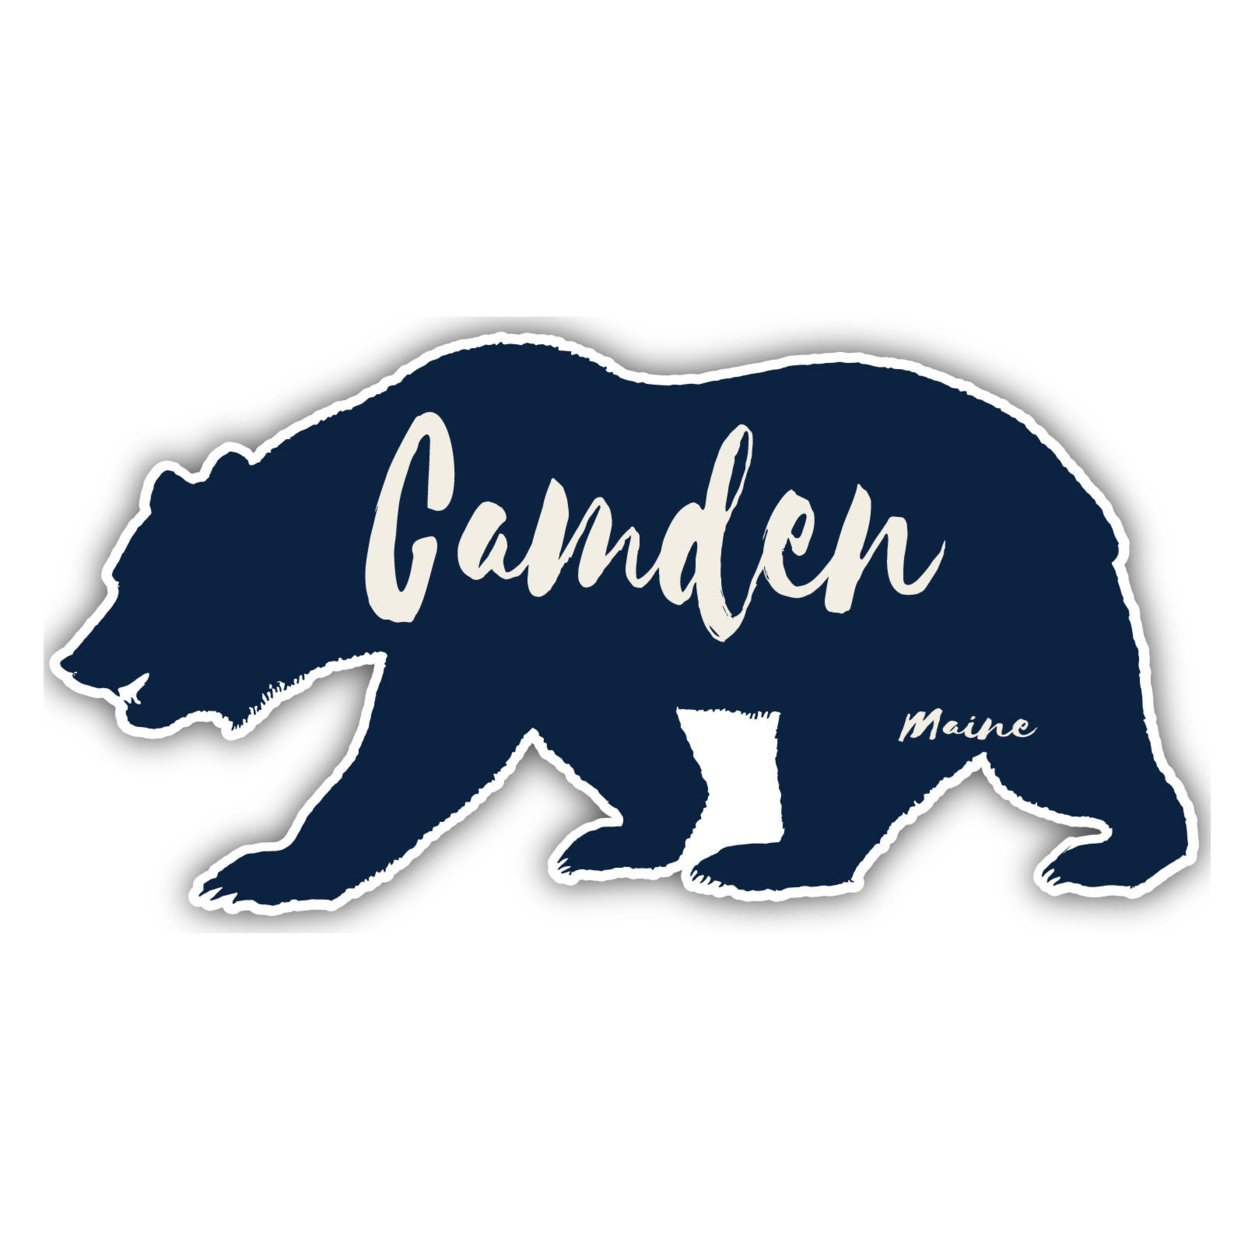 Camden Maine Souvenir Decorative Stickers (Choose Theme And Size) - 4-Pack, 8-Inch, Bear